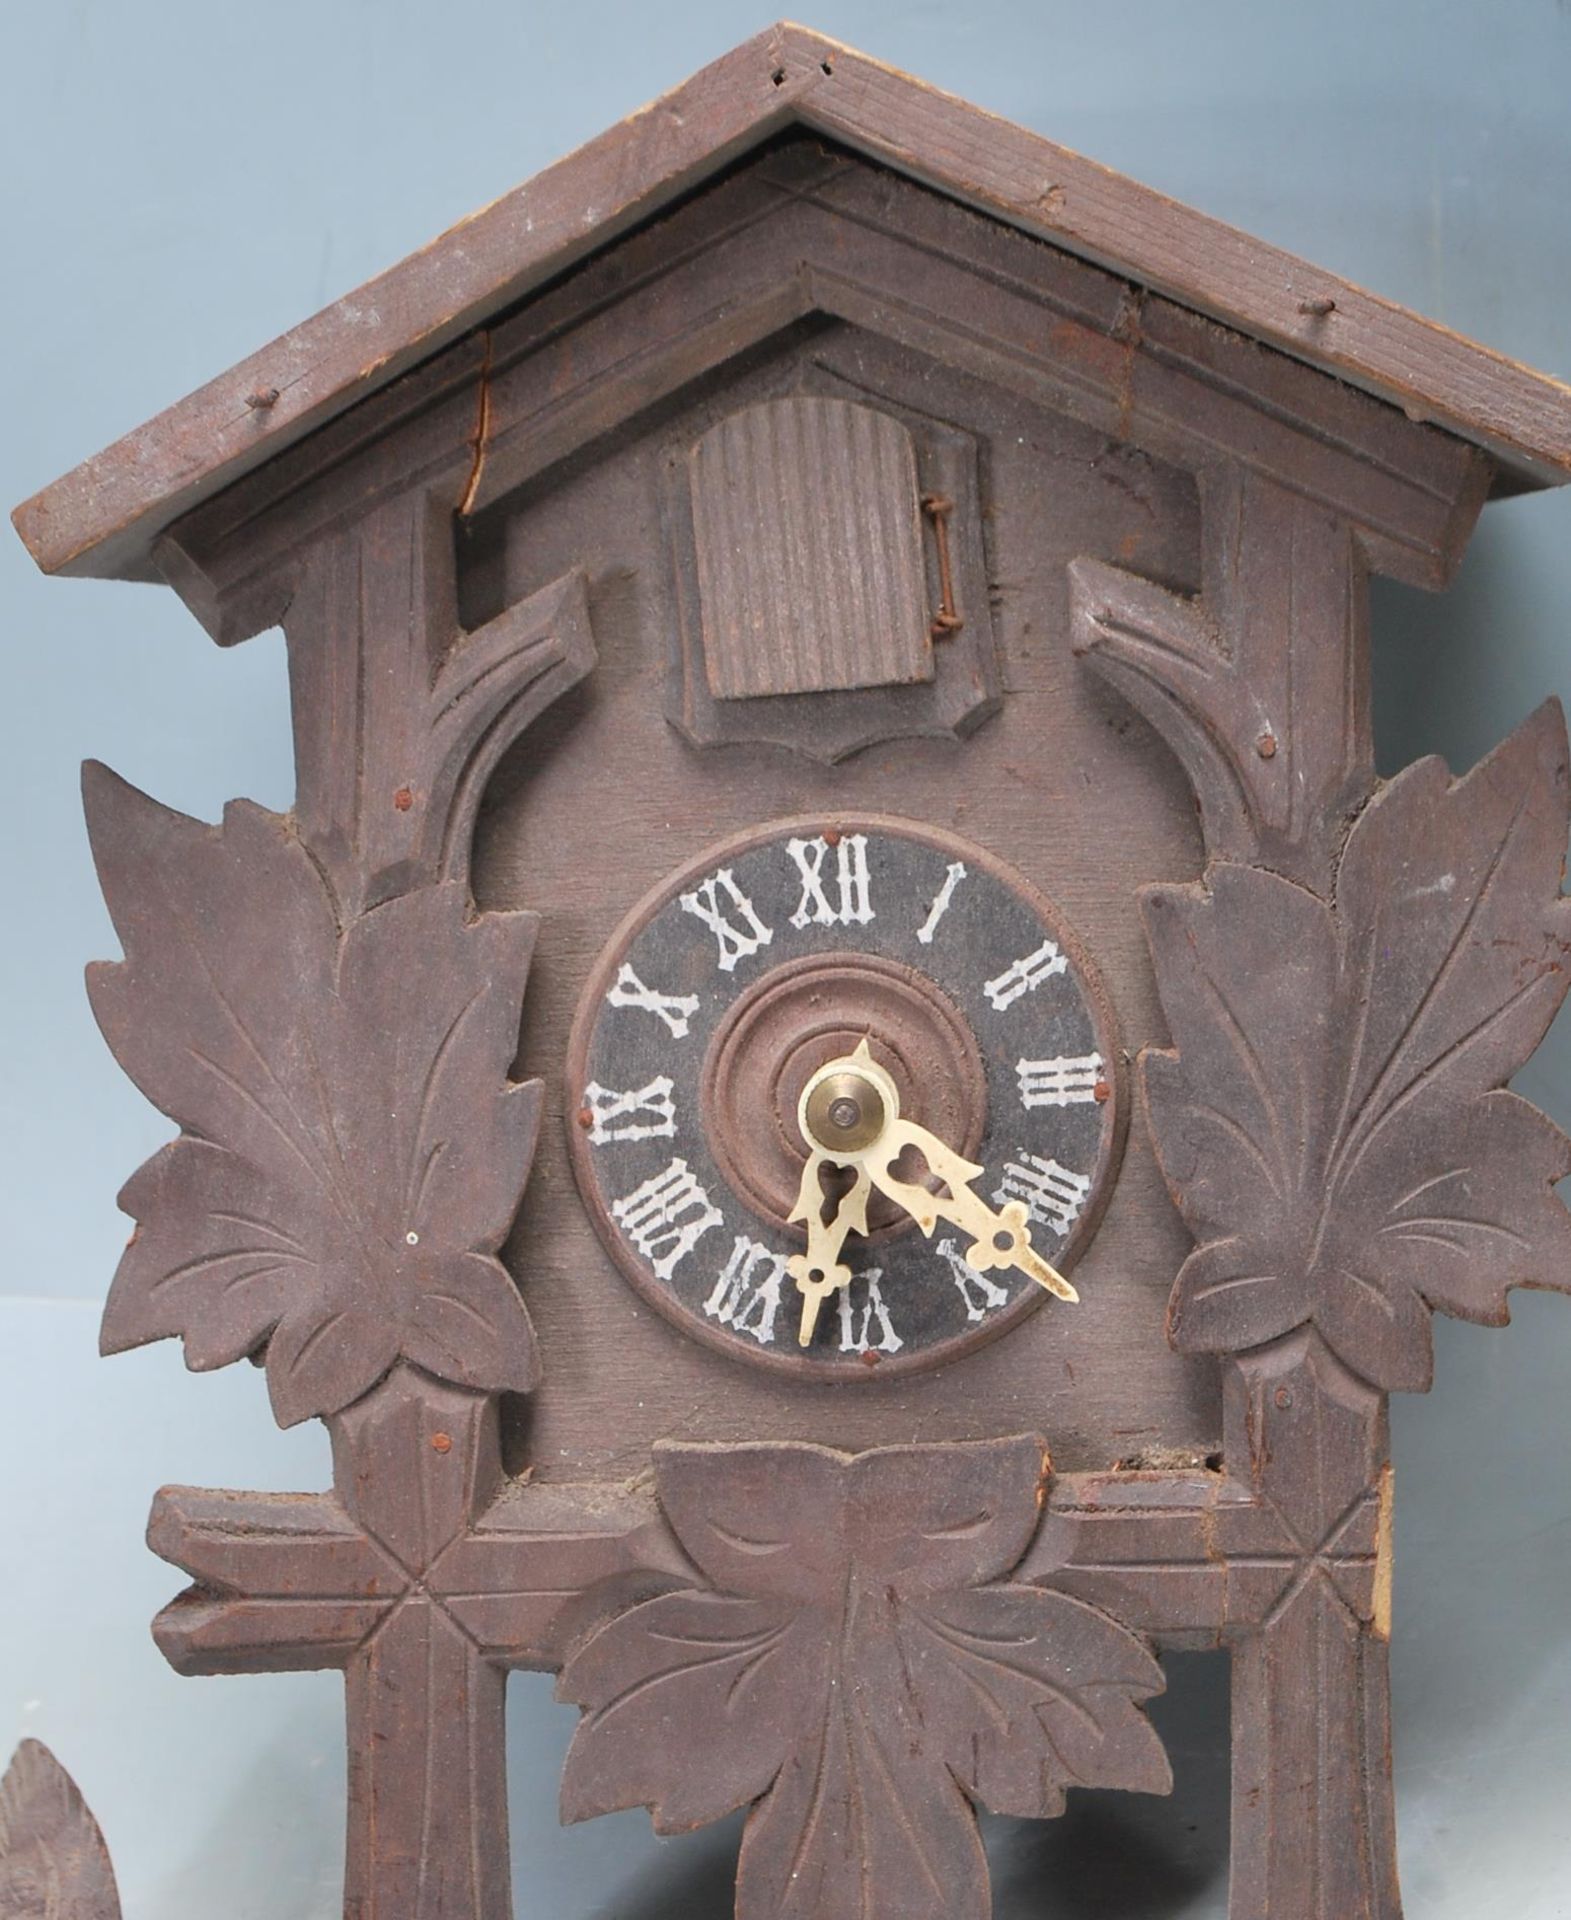 TWO EARLY 20TH CENTURY GERMAN BLACK FOREST CUCKOO CLOCKS - Image 2 of 7